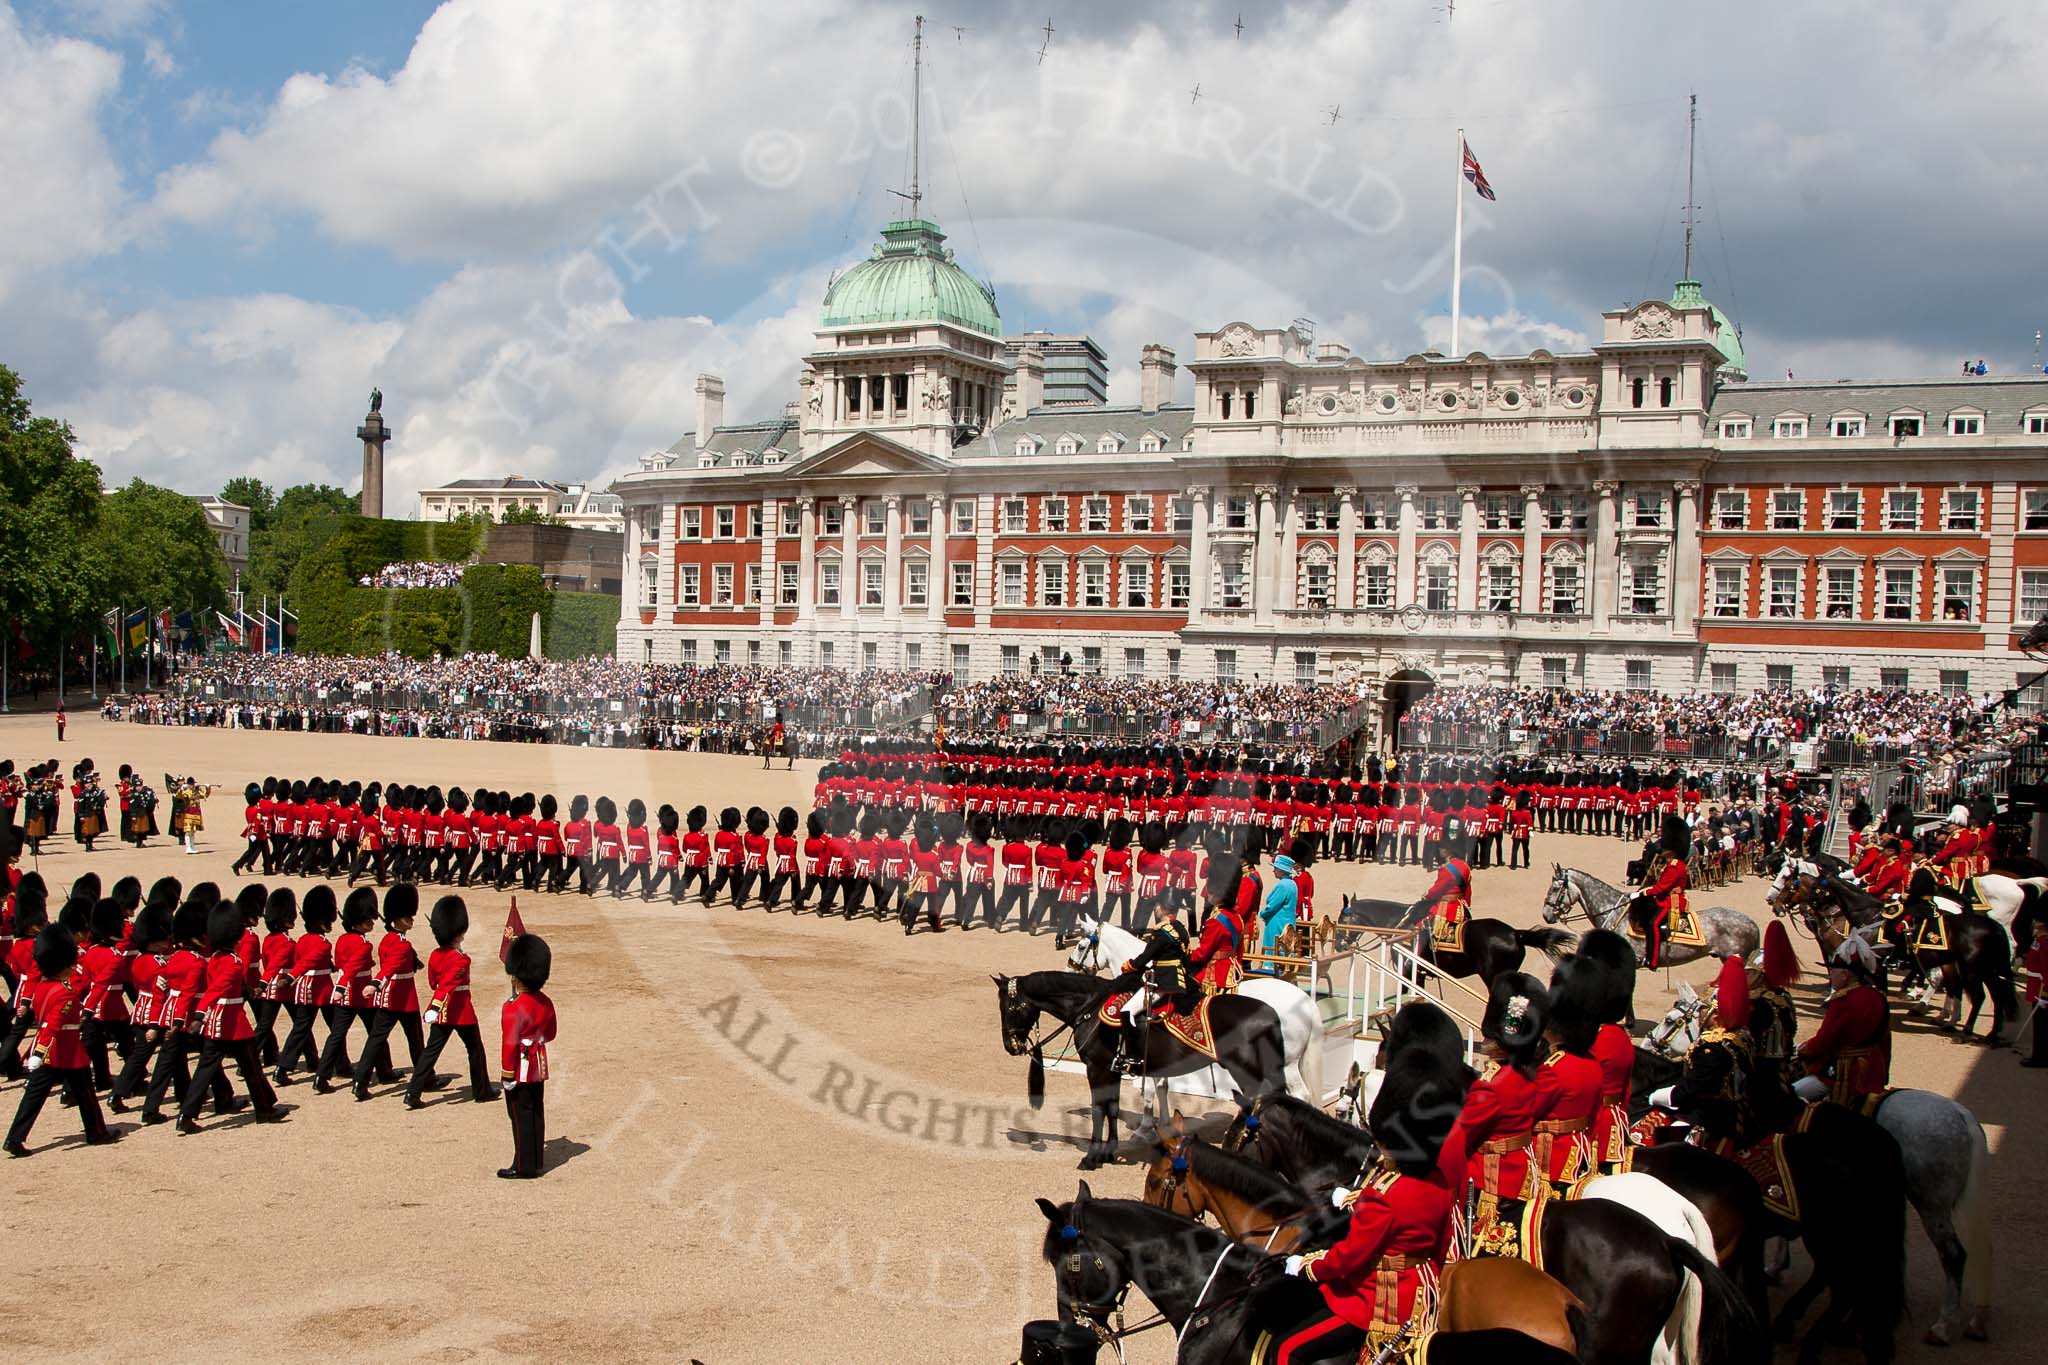 Trooping the Colour 2009: The March Past - foot guards divisions marching past Her Majesty, standing with the Duke of Edinburg on the saluting base. To their left and right the Royal Colonels..
Horse Guards Parade, Westminster,
London SW1,

United Kingdom,
on 13 June 2009 at 11:49, image #222